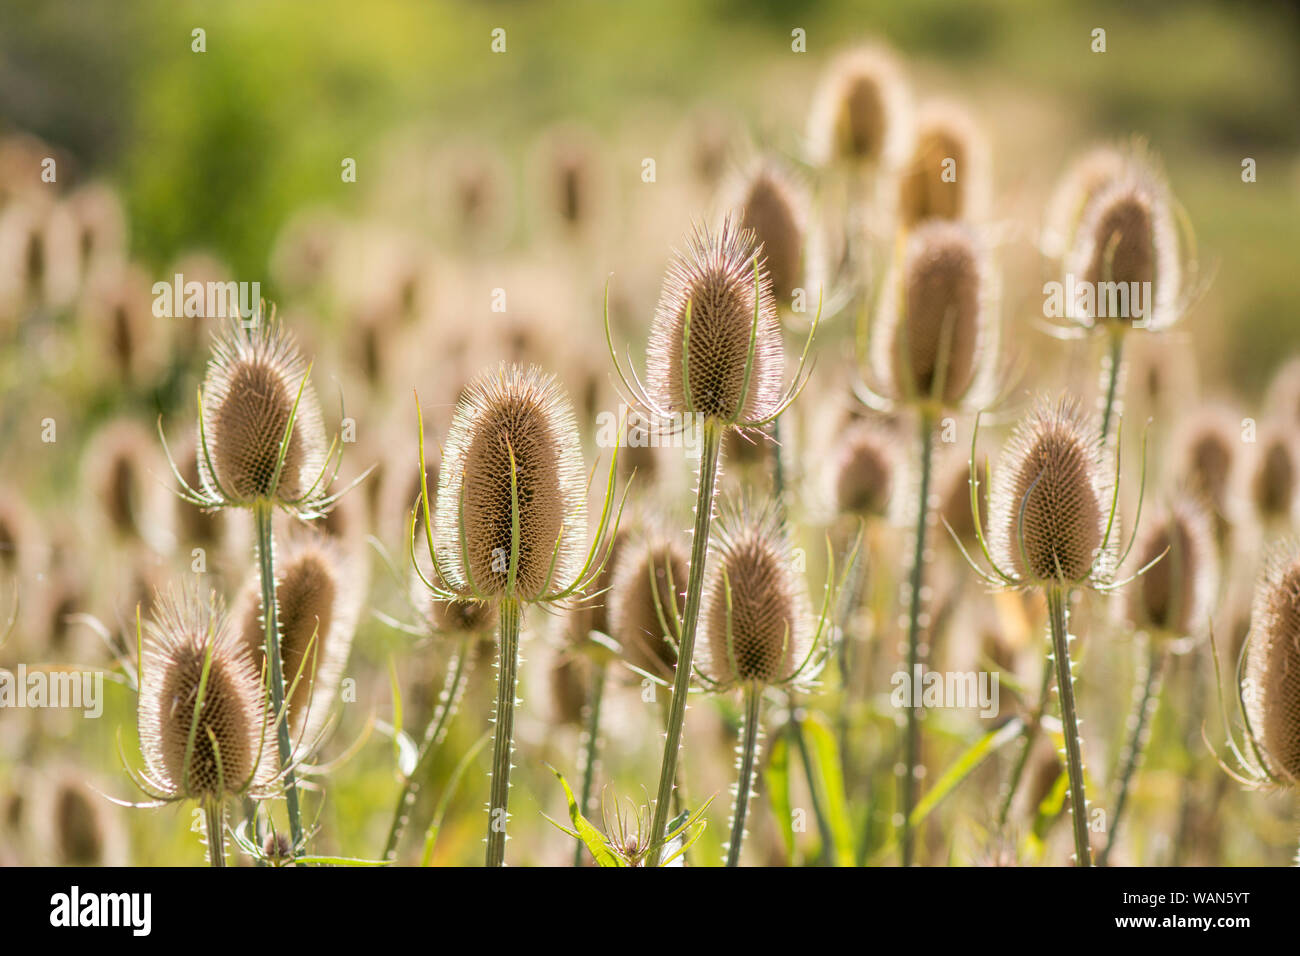 Dry seed pods of Indian Teasel, Dipsacus sativus, flower head. Stock Photo